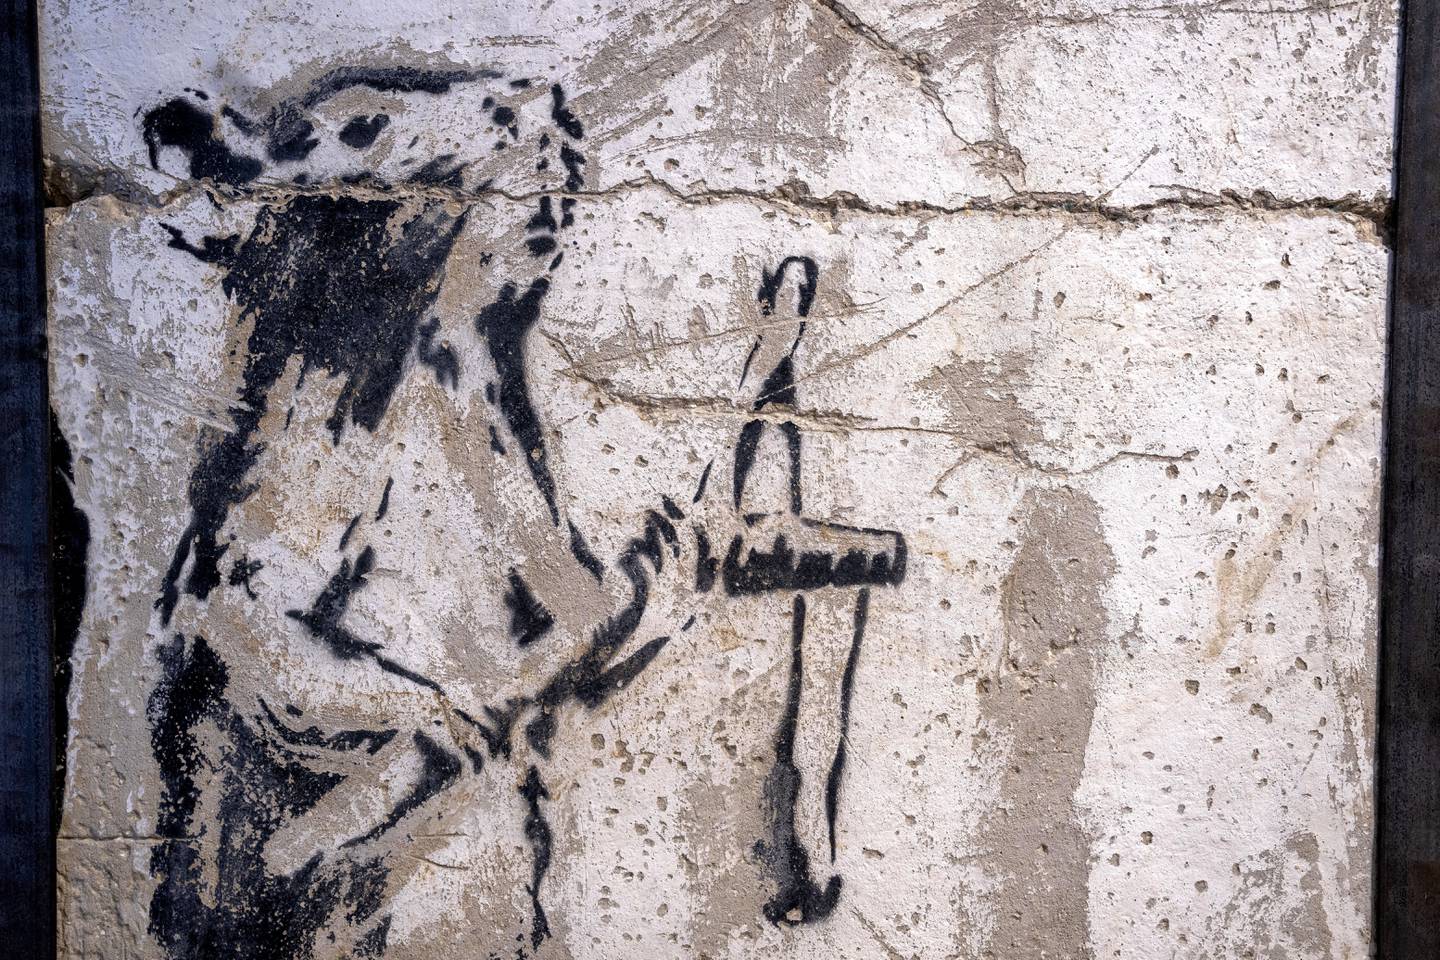 The painting of a slingshot-toting rat once stood near Israel's separation barrier and was one of several works created in 2007. AP